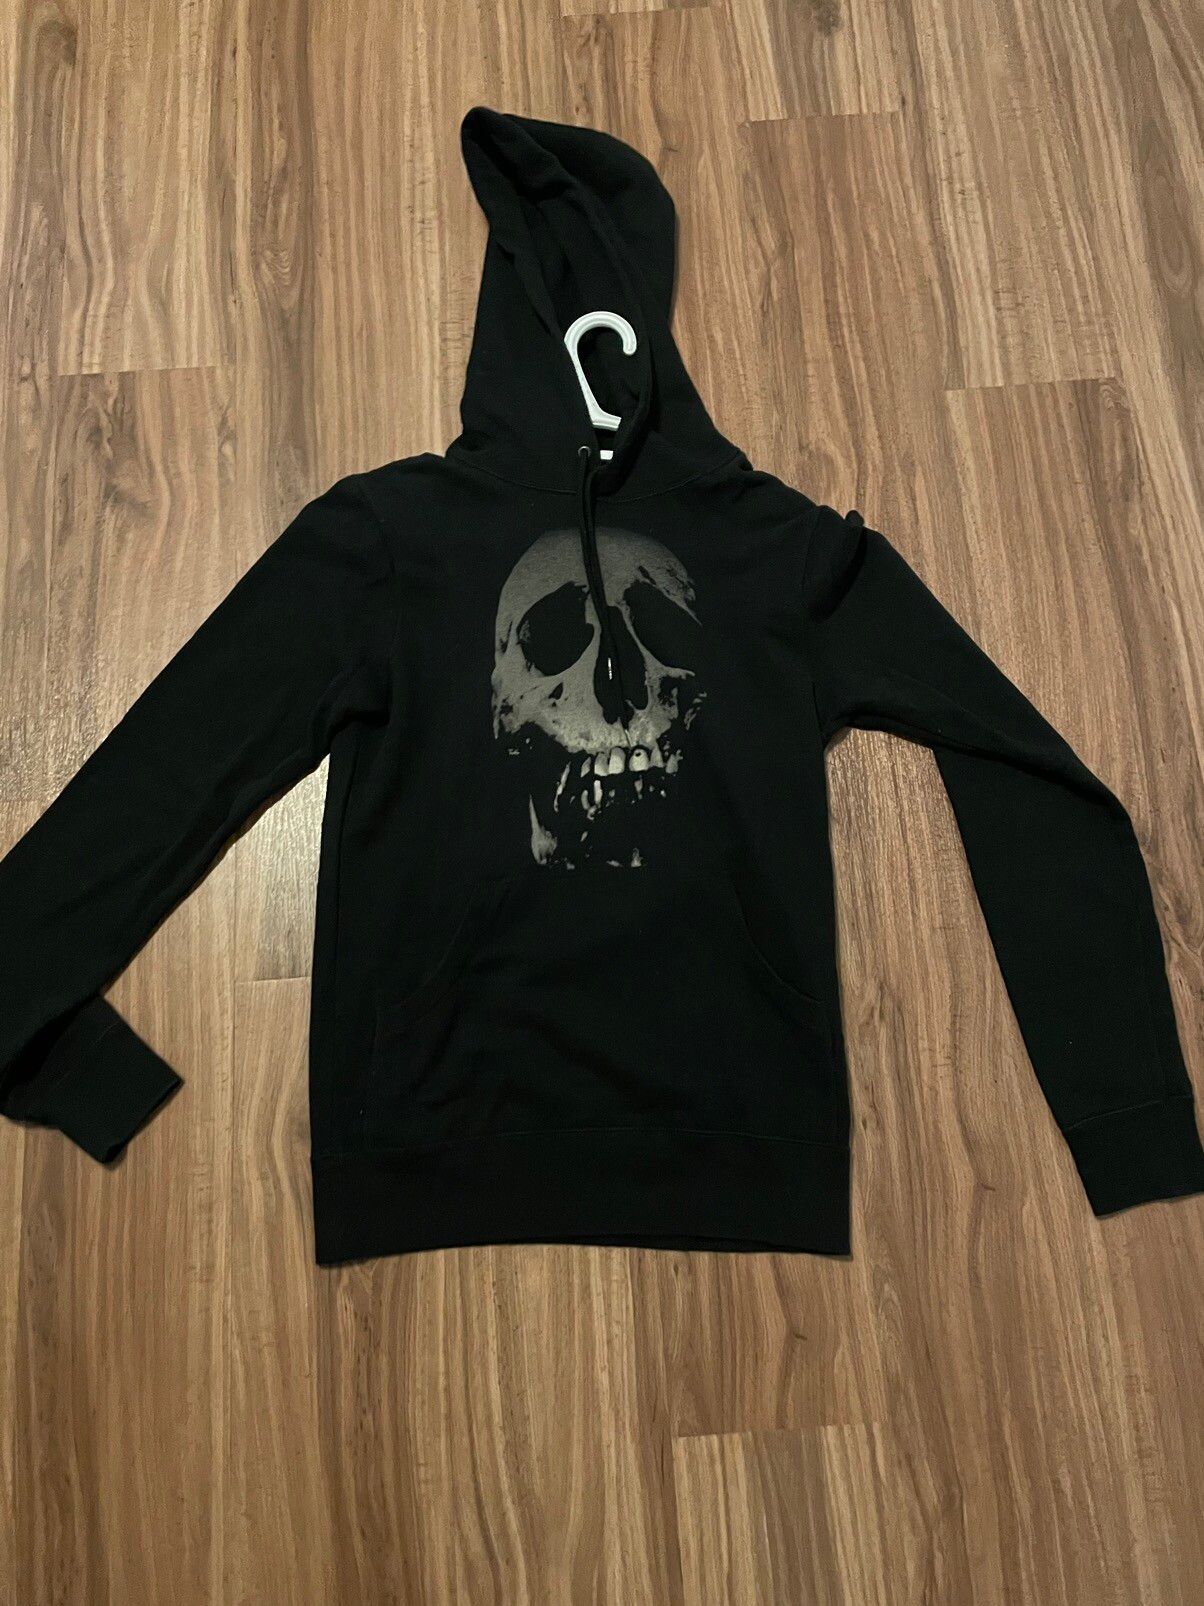 Hysteric Glamour Hysteric Glamour Skullberry Hoodie | Grailed